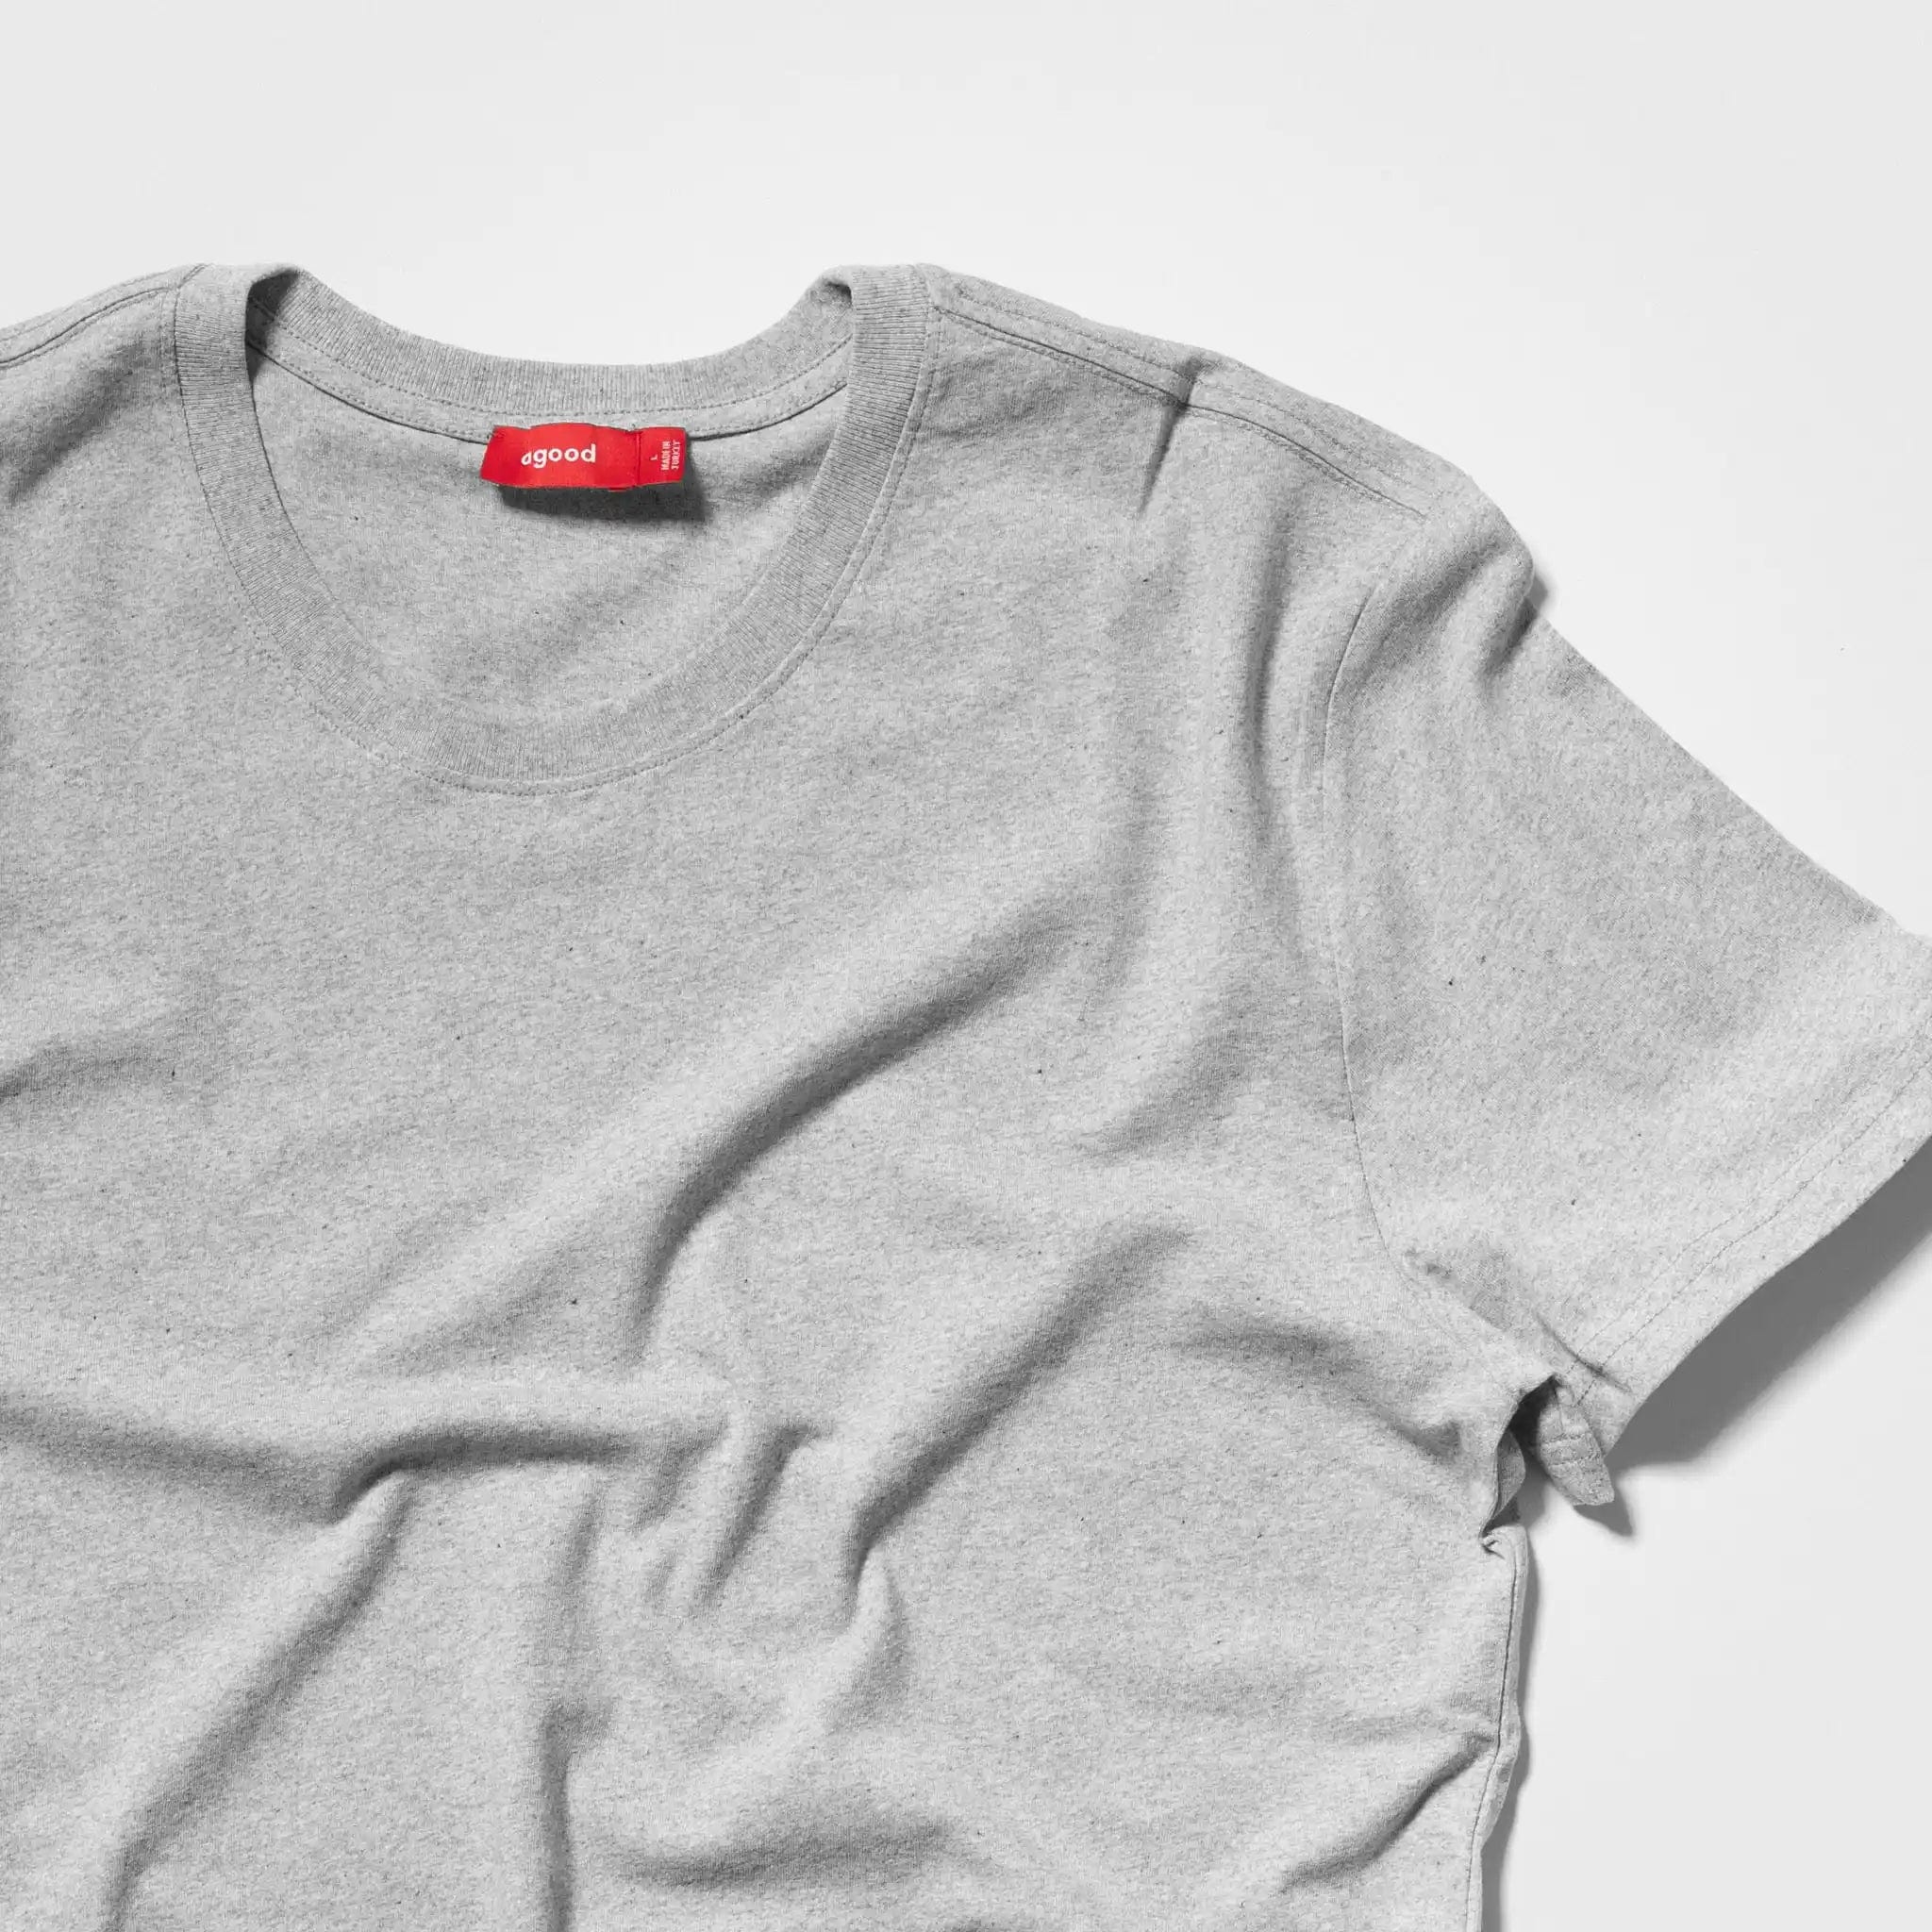 Grey Men's T-Shirt Made from Recycled and Organic Cotton